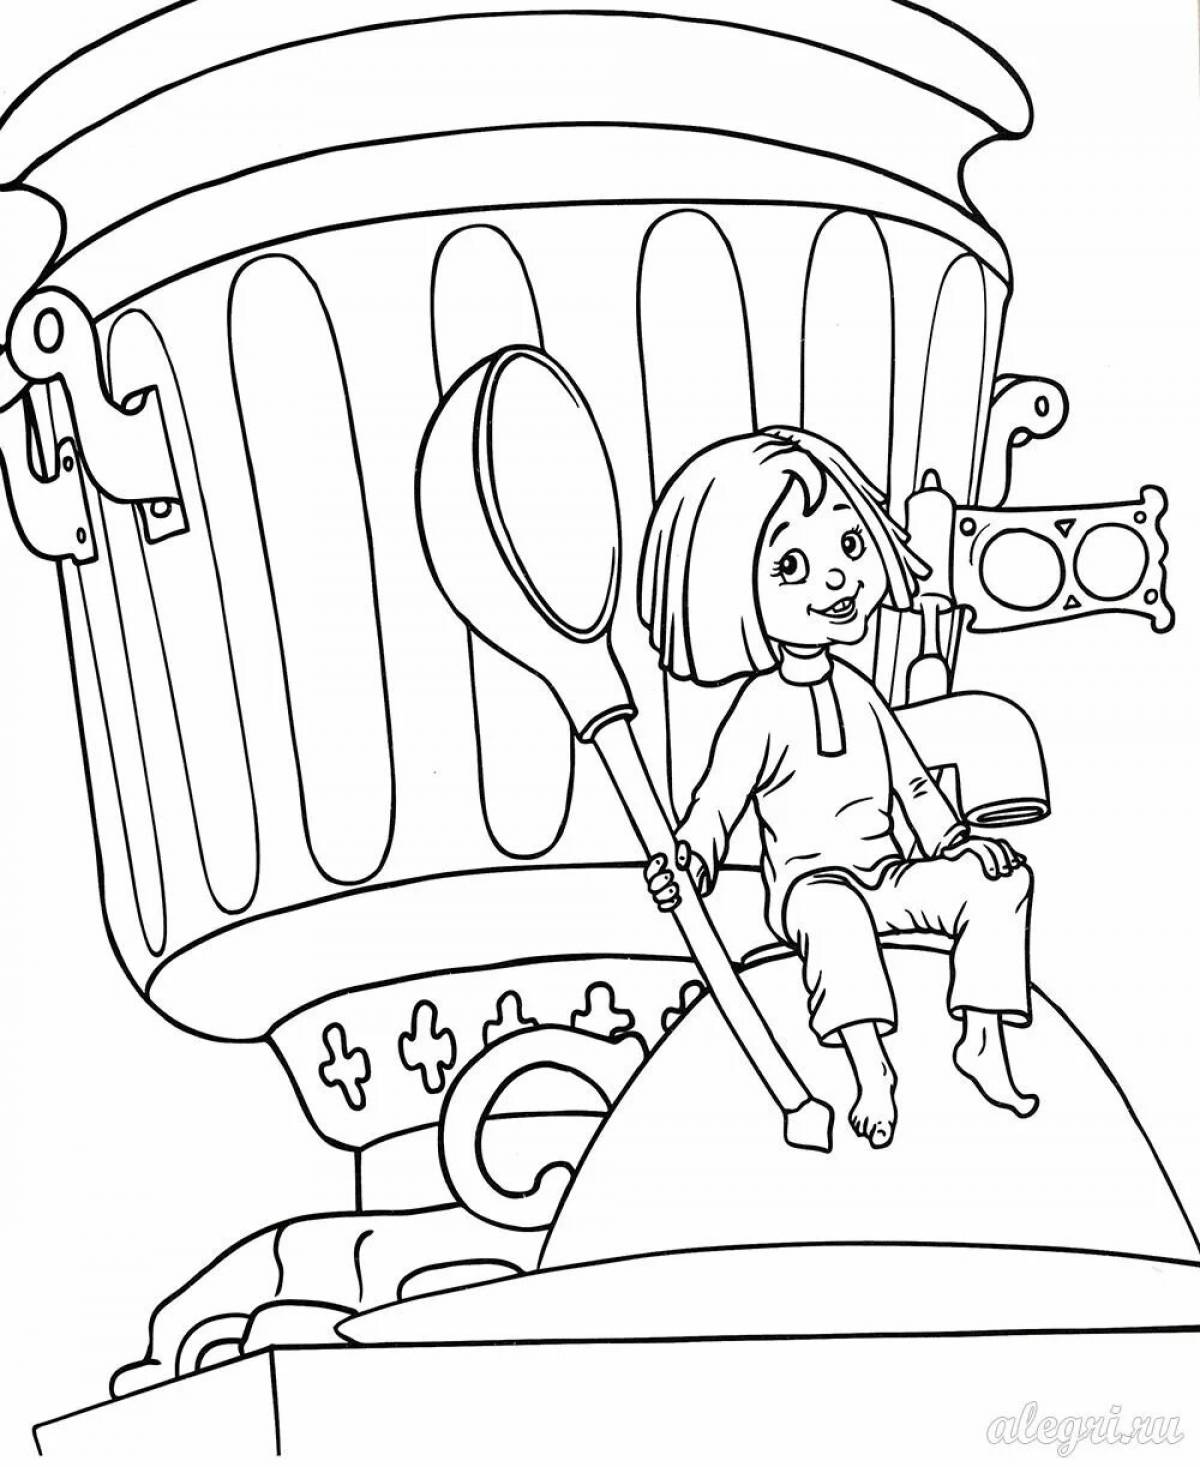 Fascinating coloring book boy with thumb for kids